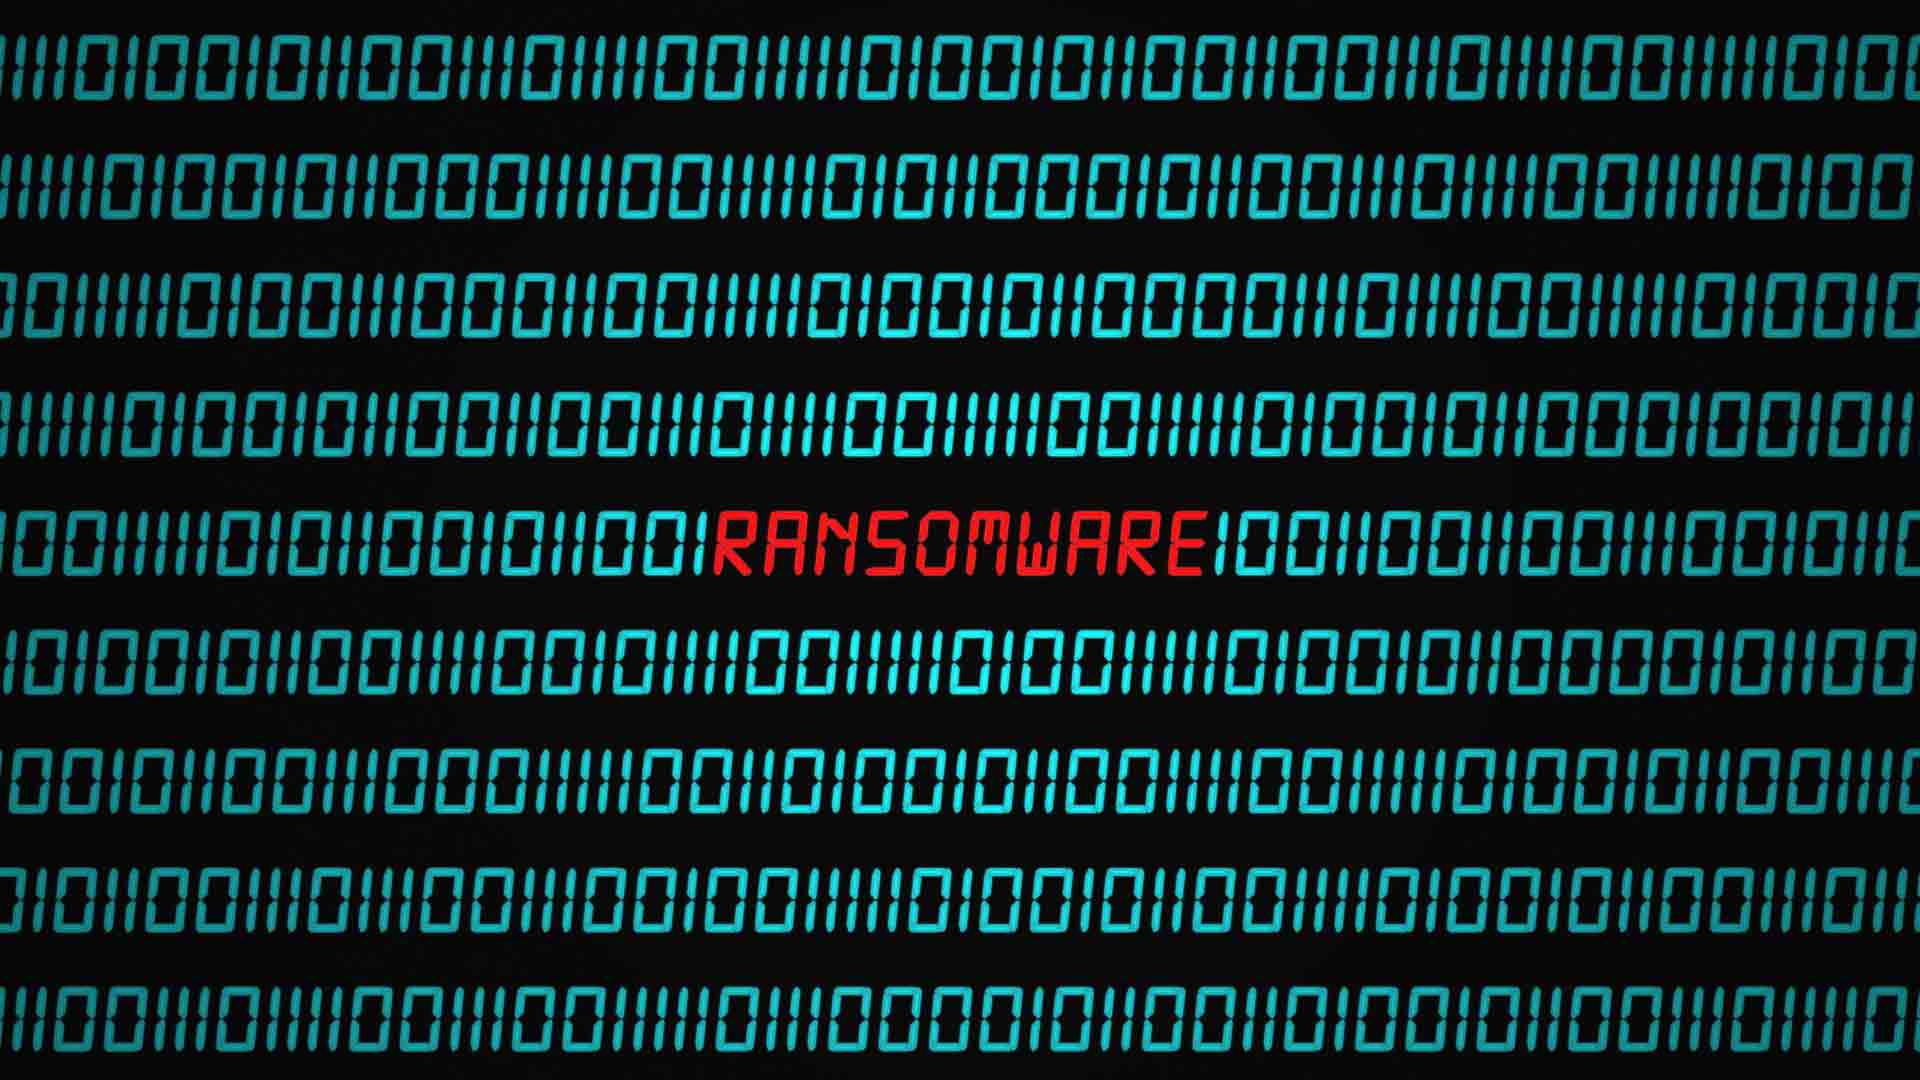 4 Tips for Protecting Your Small Business from a Ransomware Attack